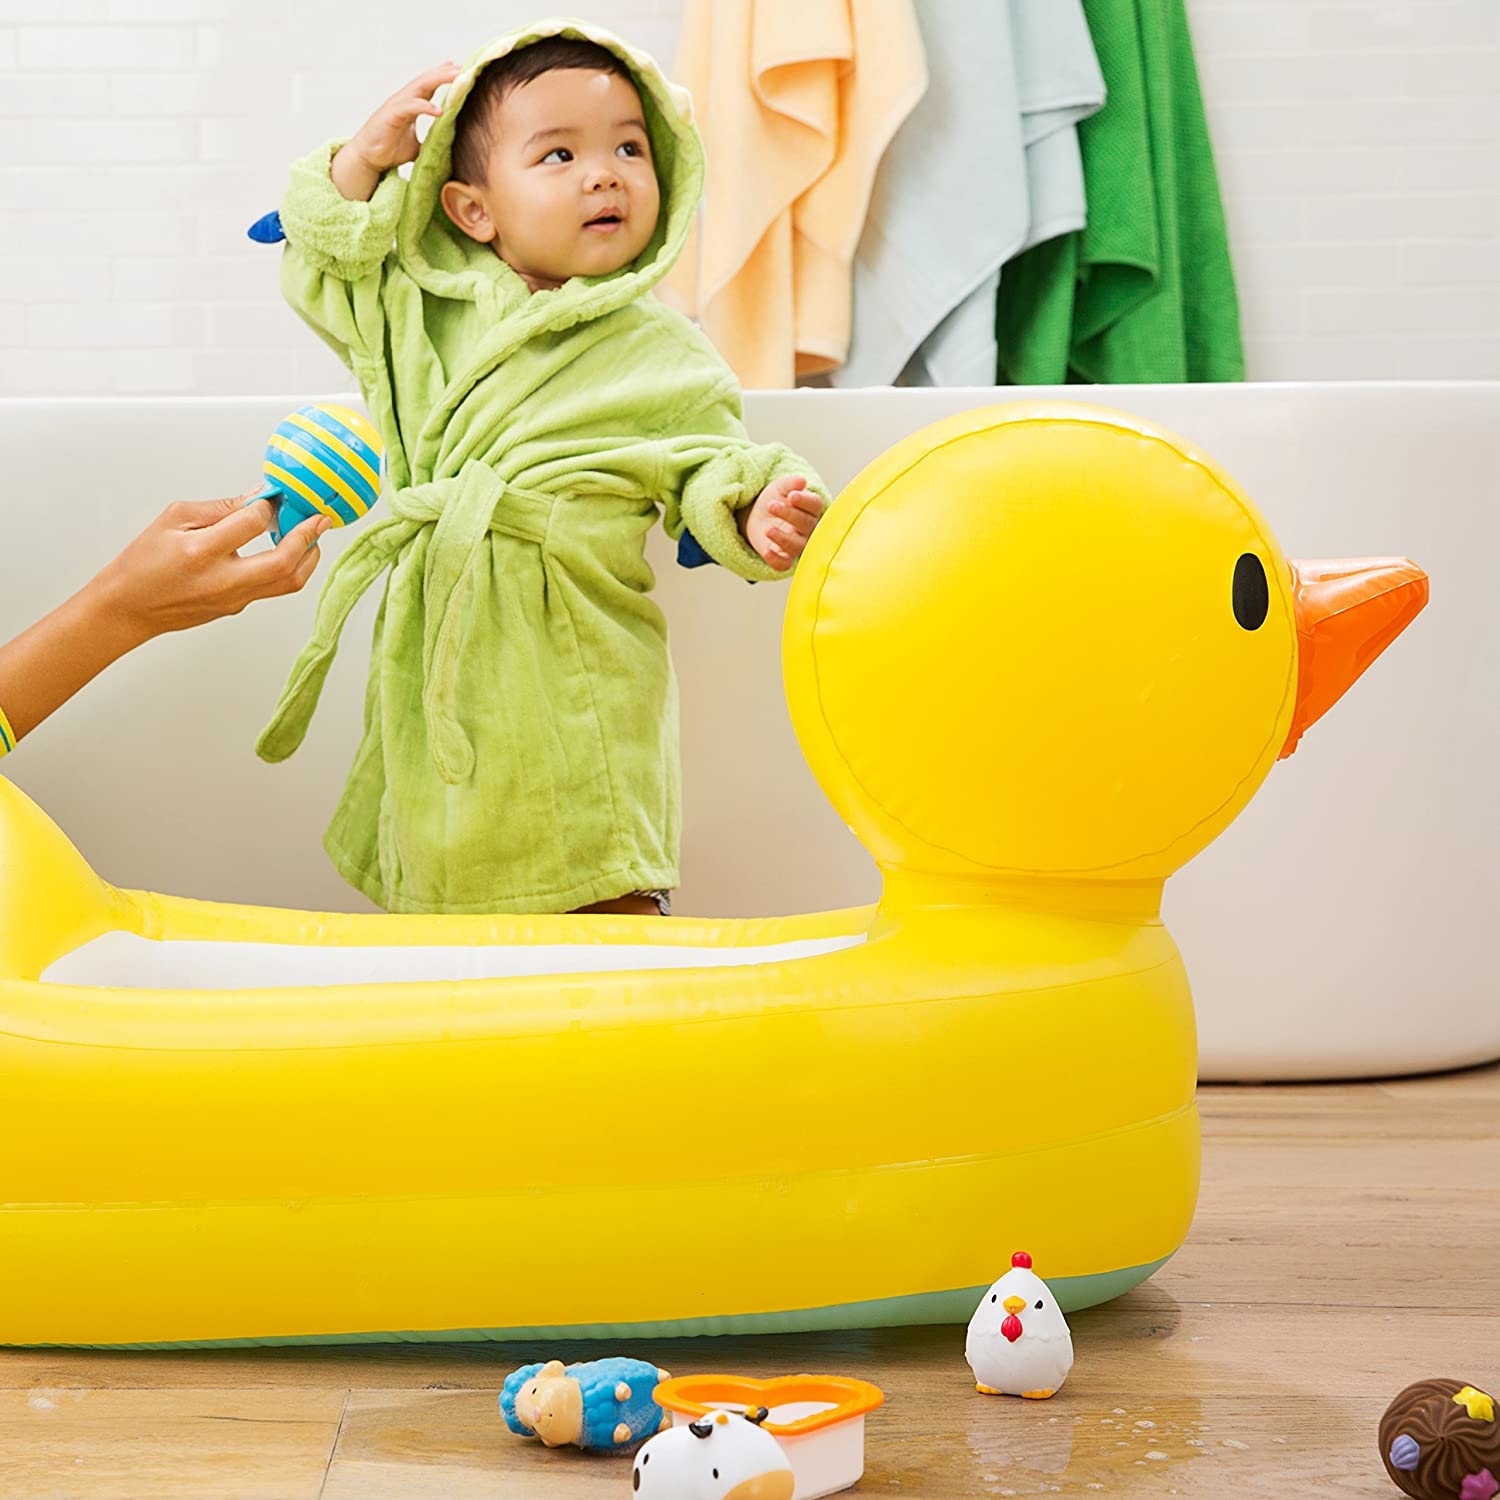 child in robe standing beside ducky tub in bathroom